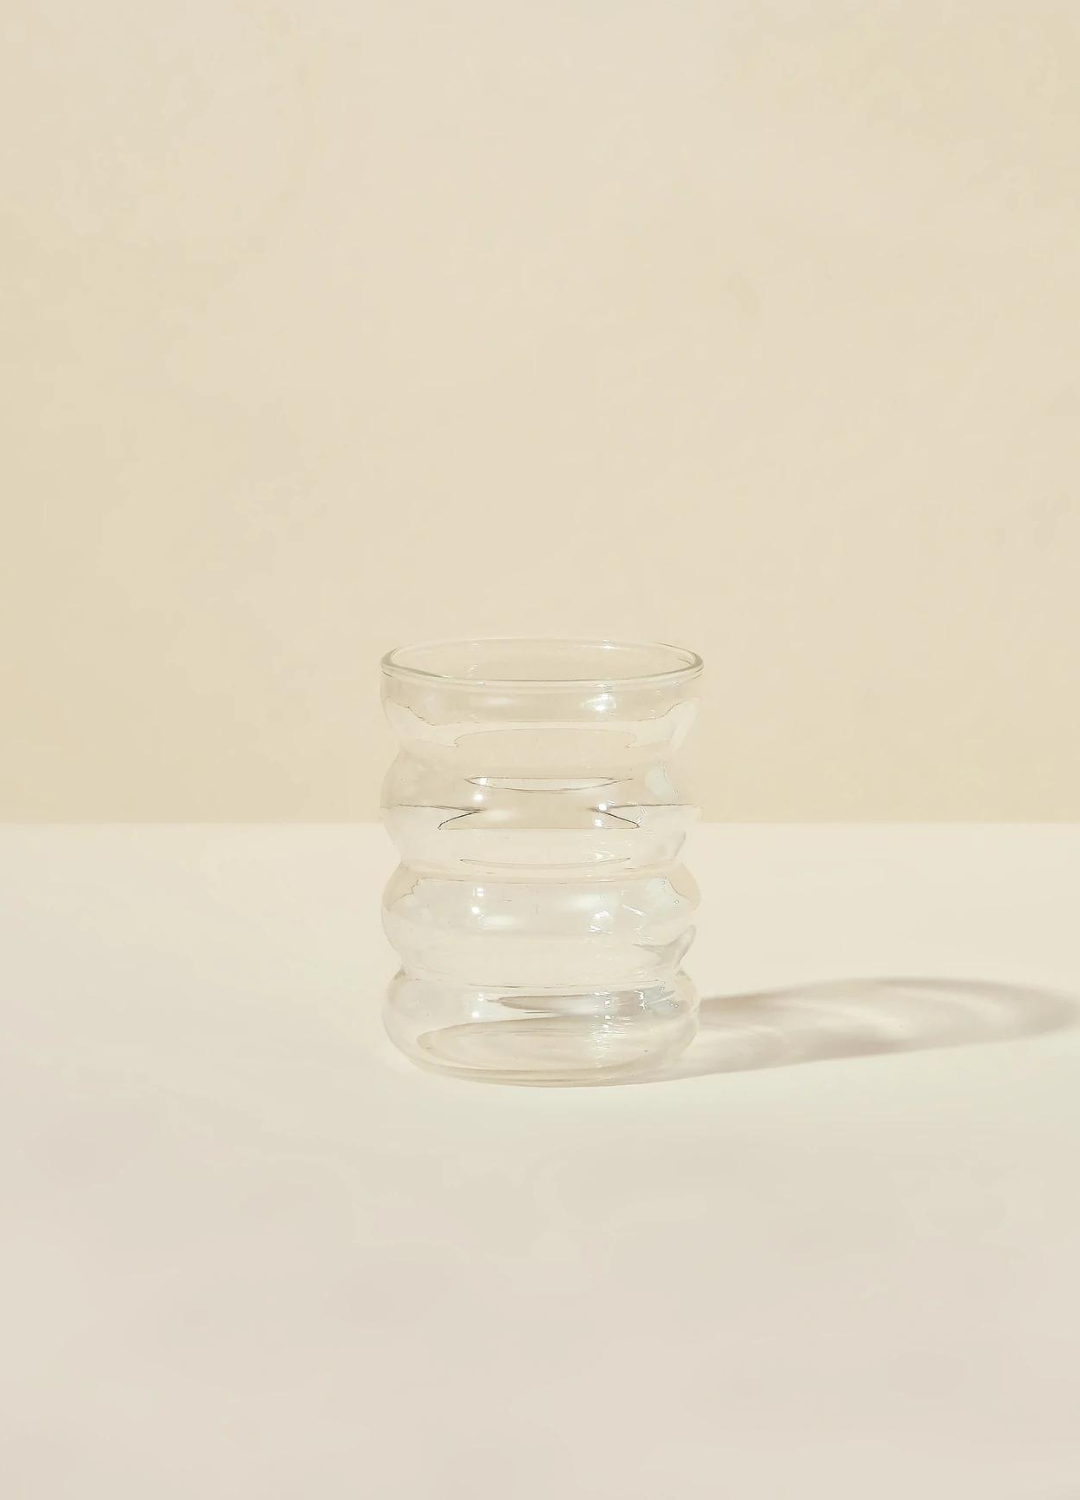 The Glass Bubble Cup